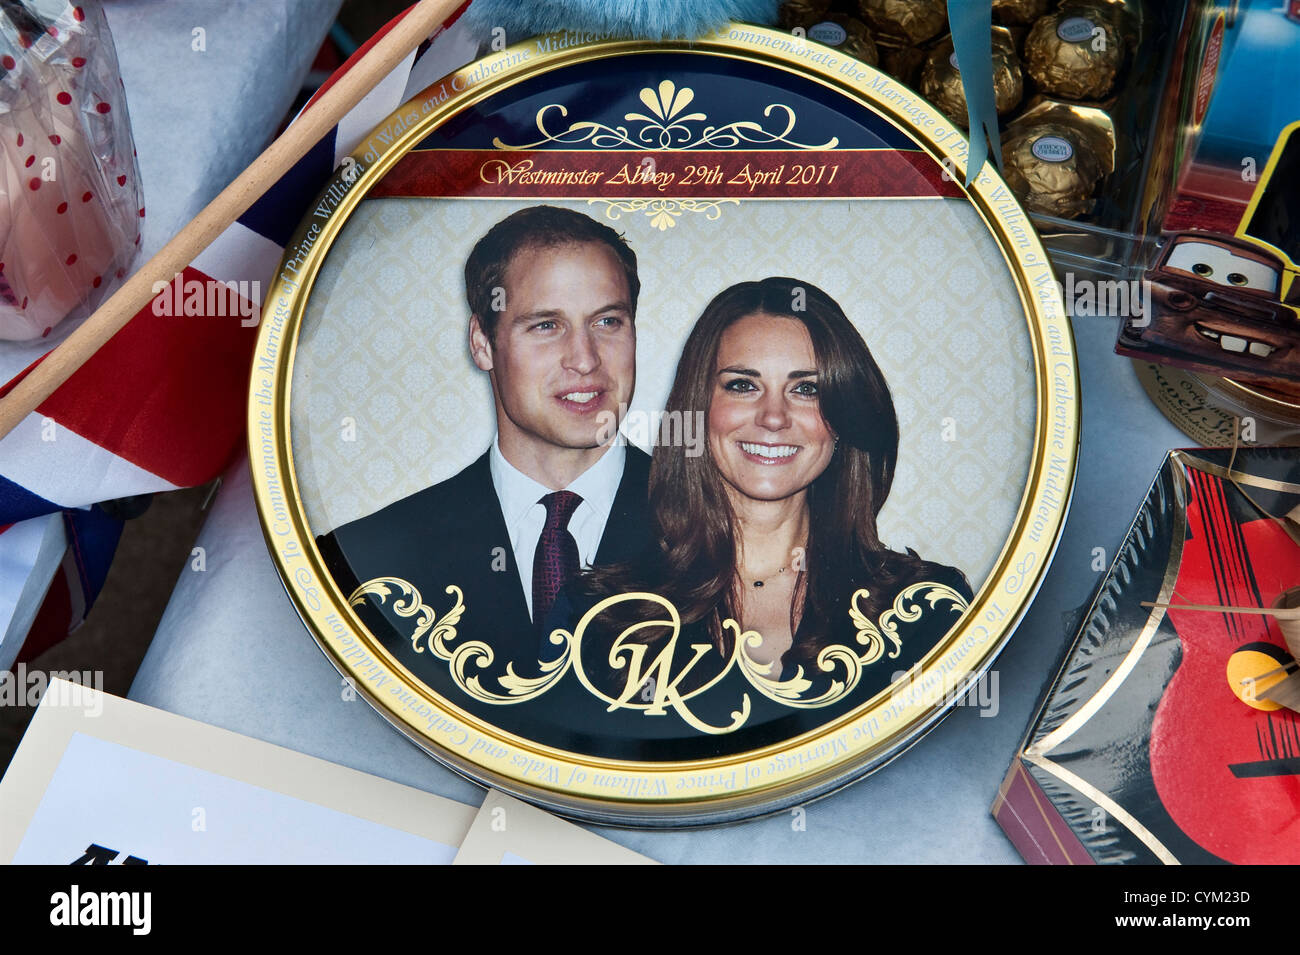 A royal wedding souvenir cake tin showing Prince William and Kate Middleton, at a street party to celebrate their marriage on the 29th April 2011 (UK) Stock Photo